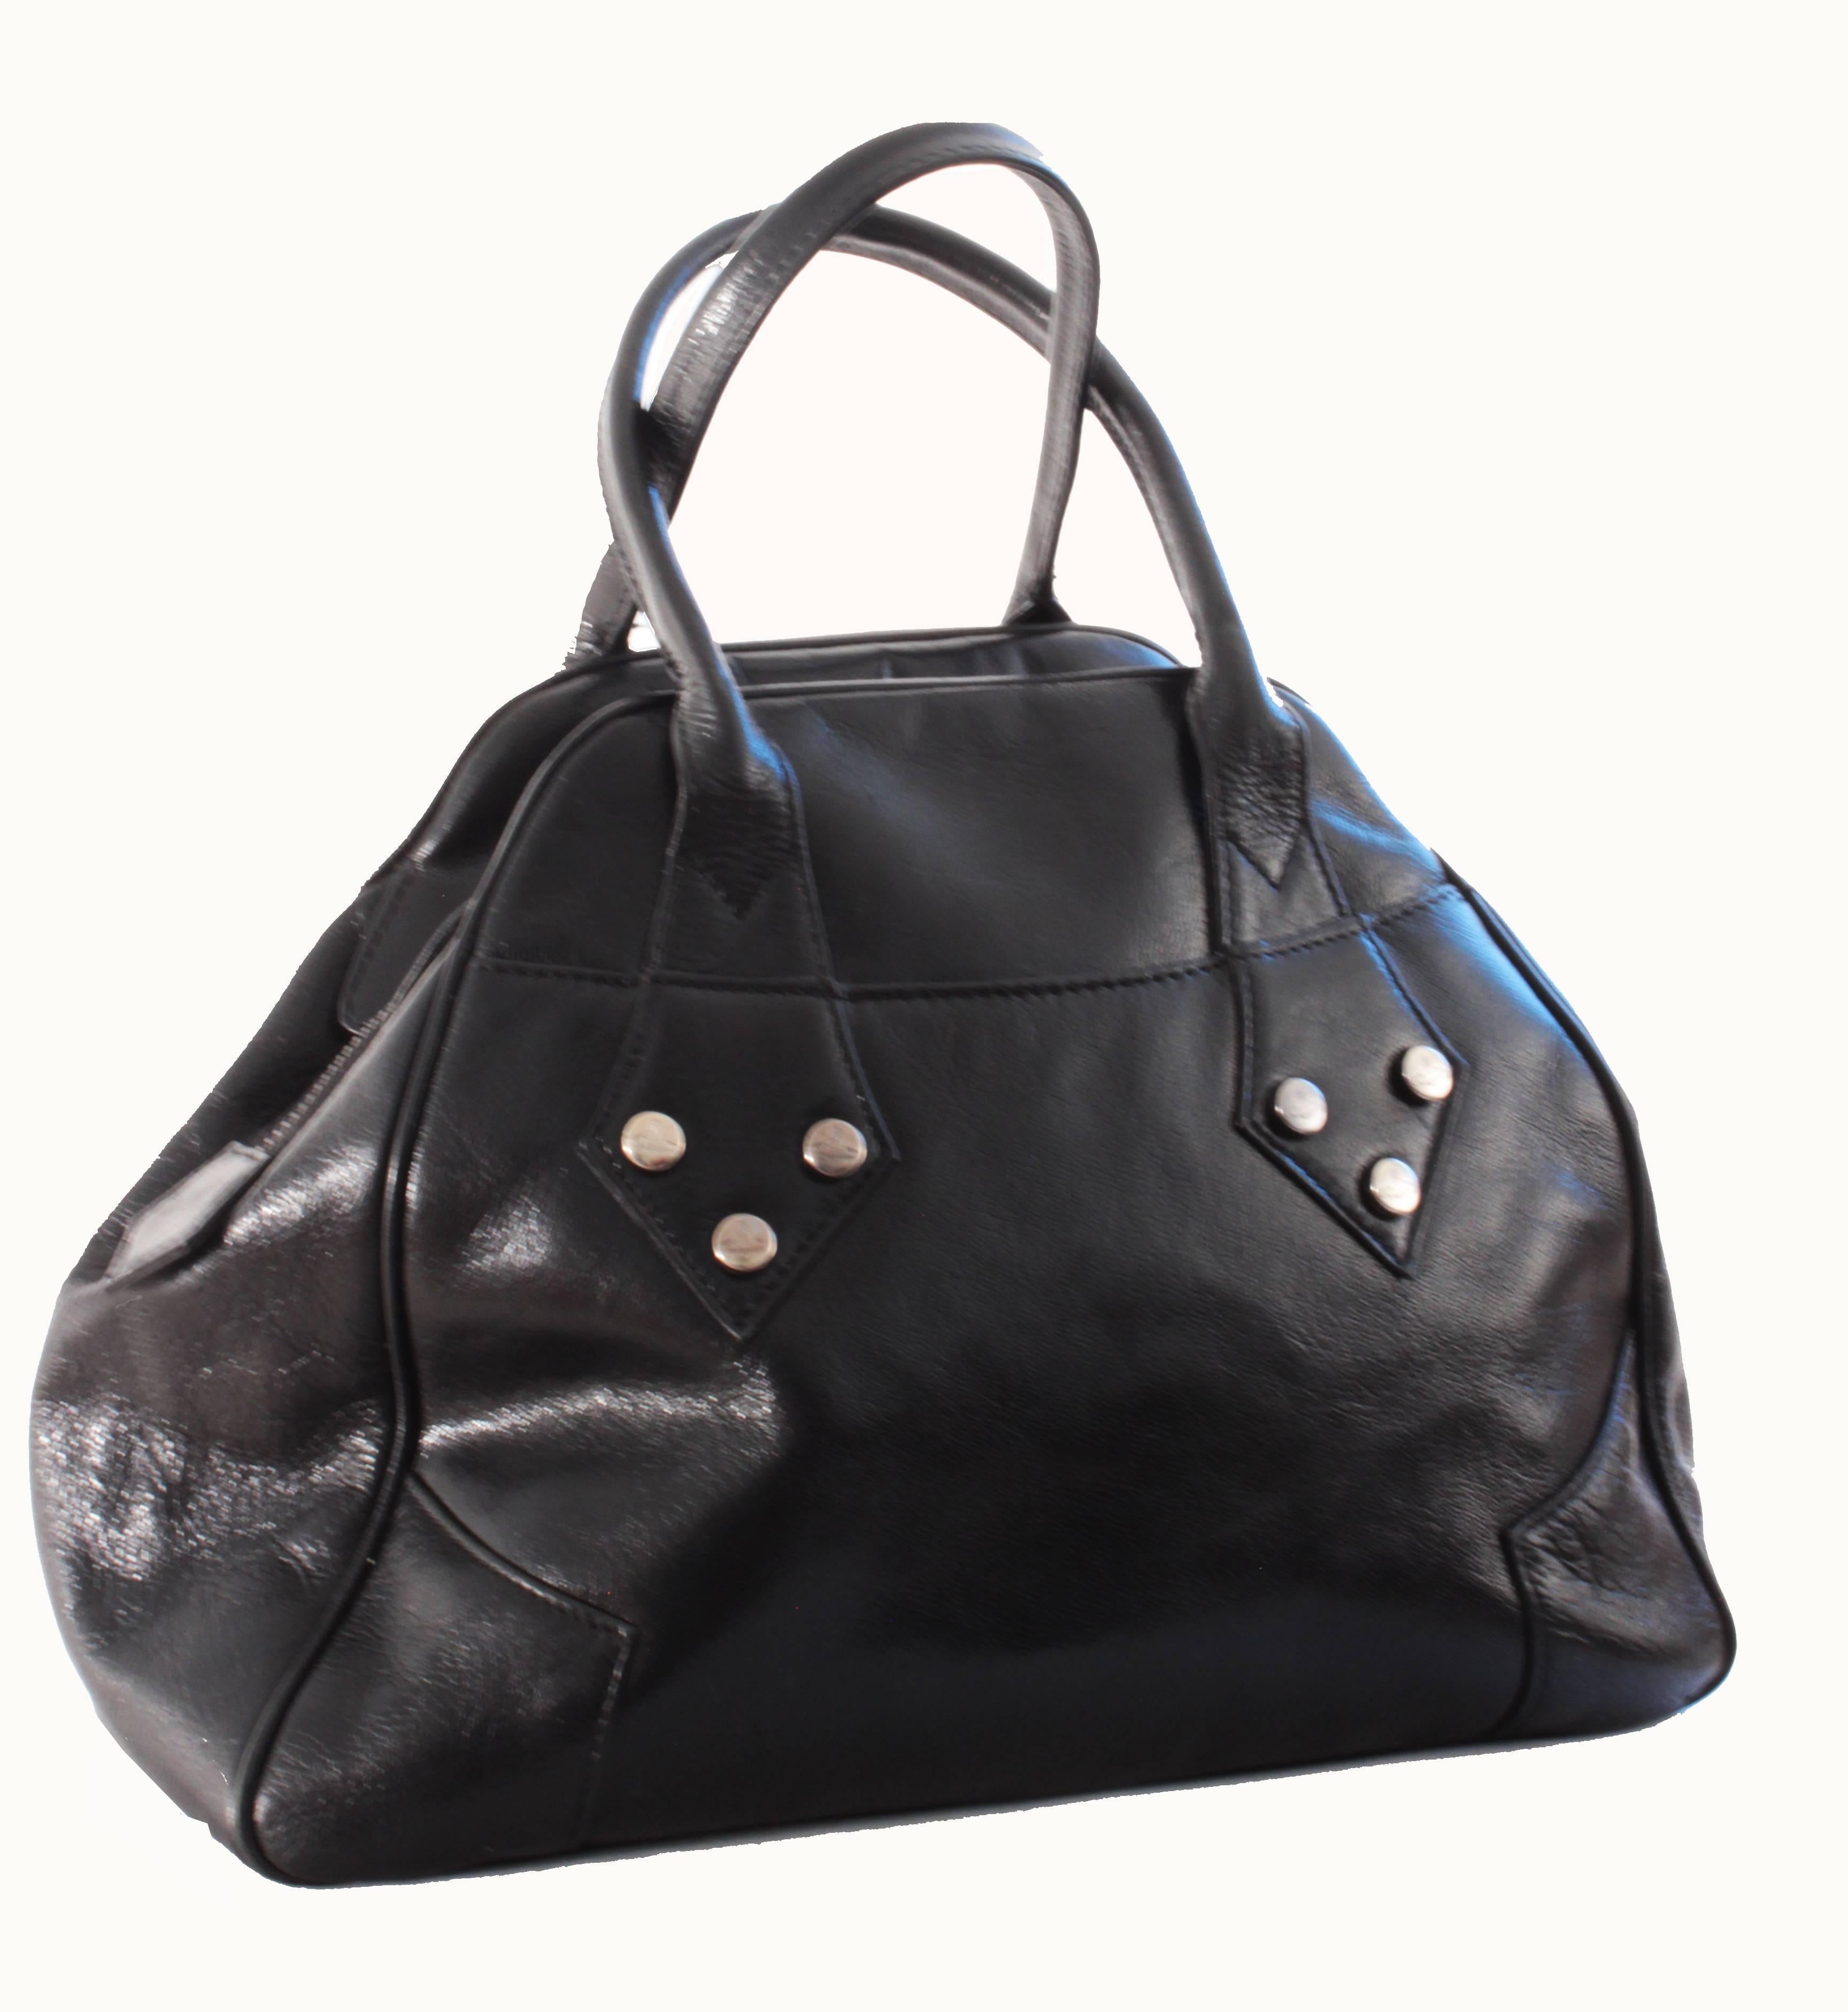 This black leather bag was made by Vivienne Westwood, most likely in 2000.  With it's bowler style shape, if features silver hardware that's embossed with the Westwood orb, double handles, and a zipper fastener with decorative metal pull with Orb